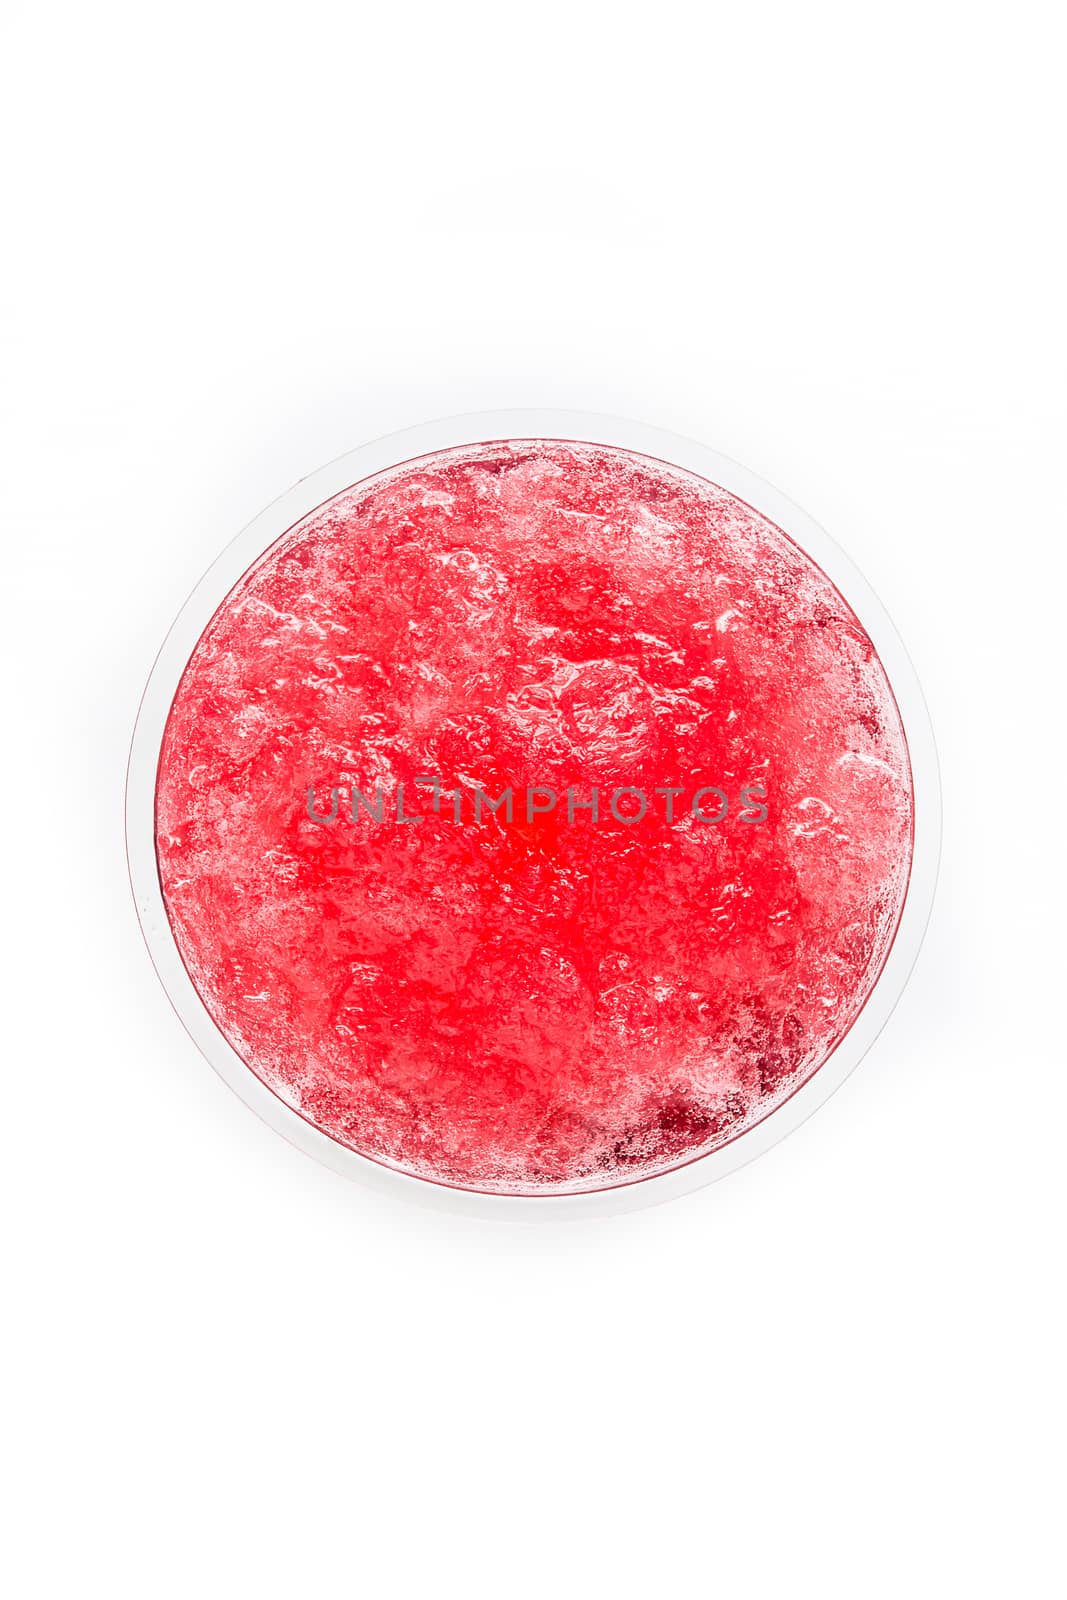 Red slushie in plastic cup isolated on white background